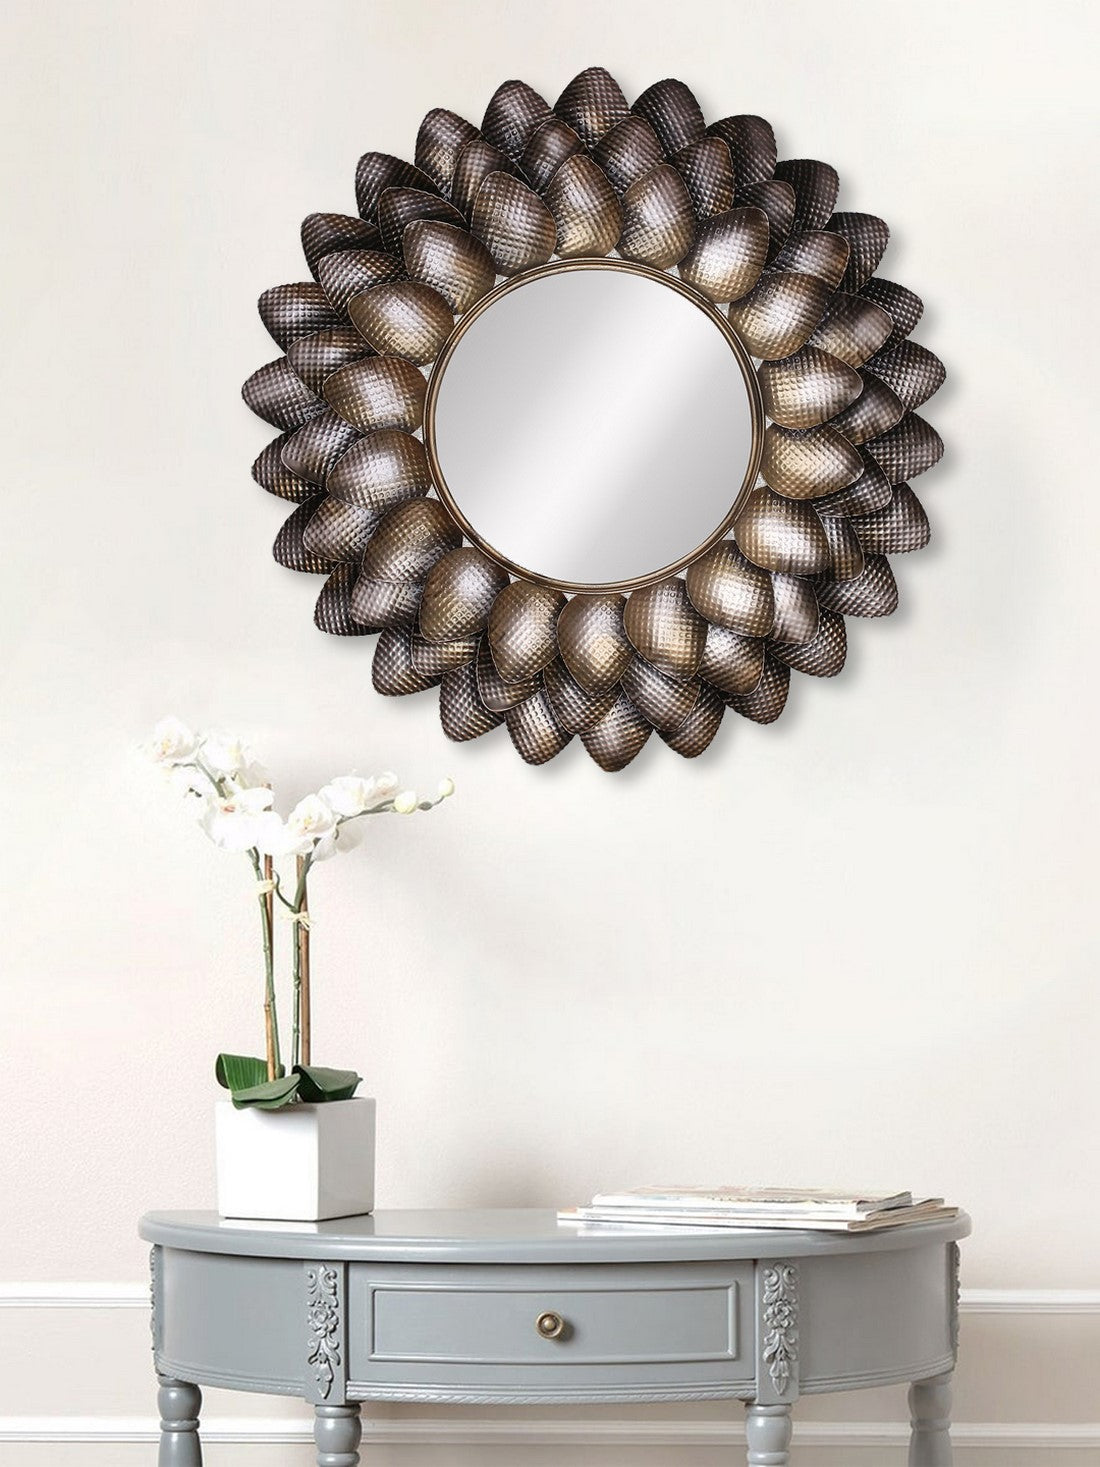 Black and Brown Decorative Metal Handcarved Wall Mirror